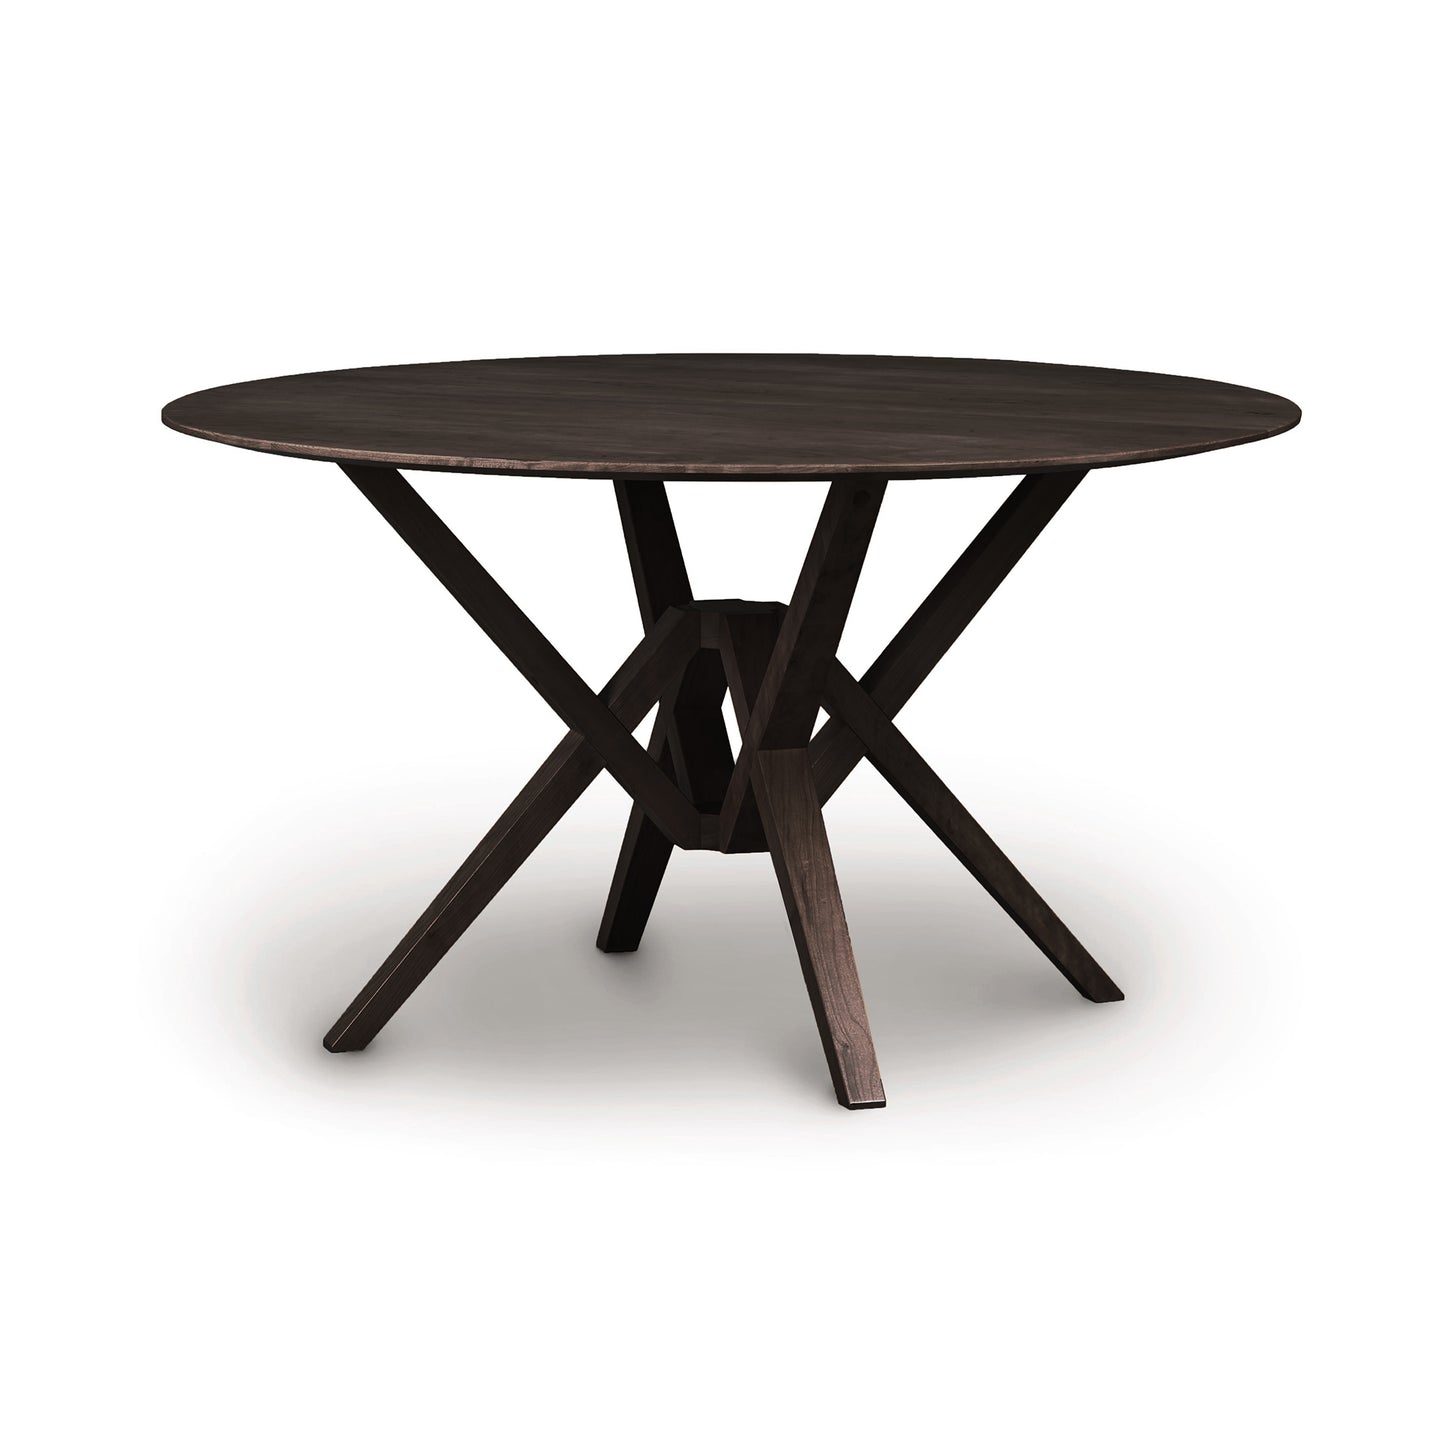 A round, dark wooden Copeland Furniture Exeter Round Solid Top Dining Table with a cross-brace base, crafted from sustainably harvested hardwoods, isolated on a white background.